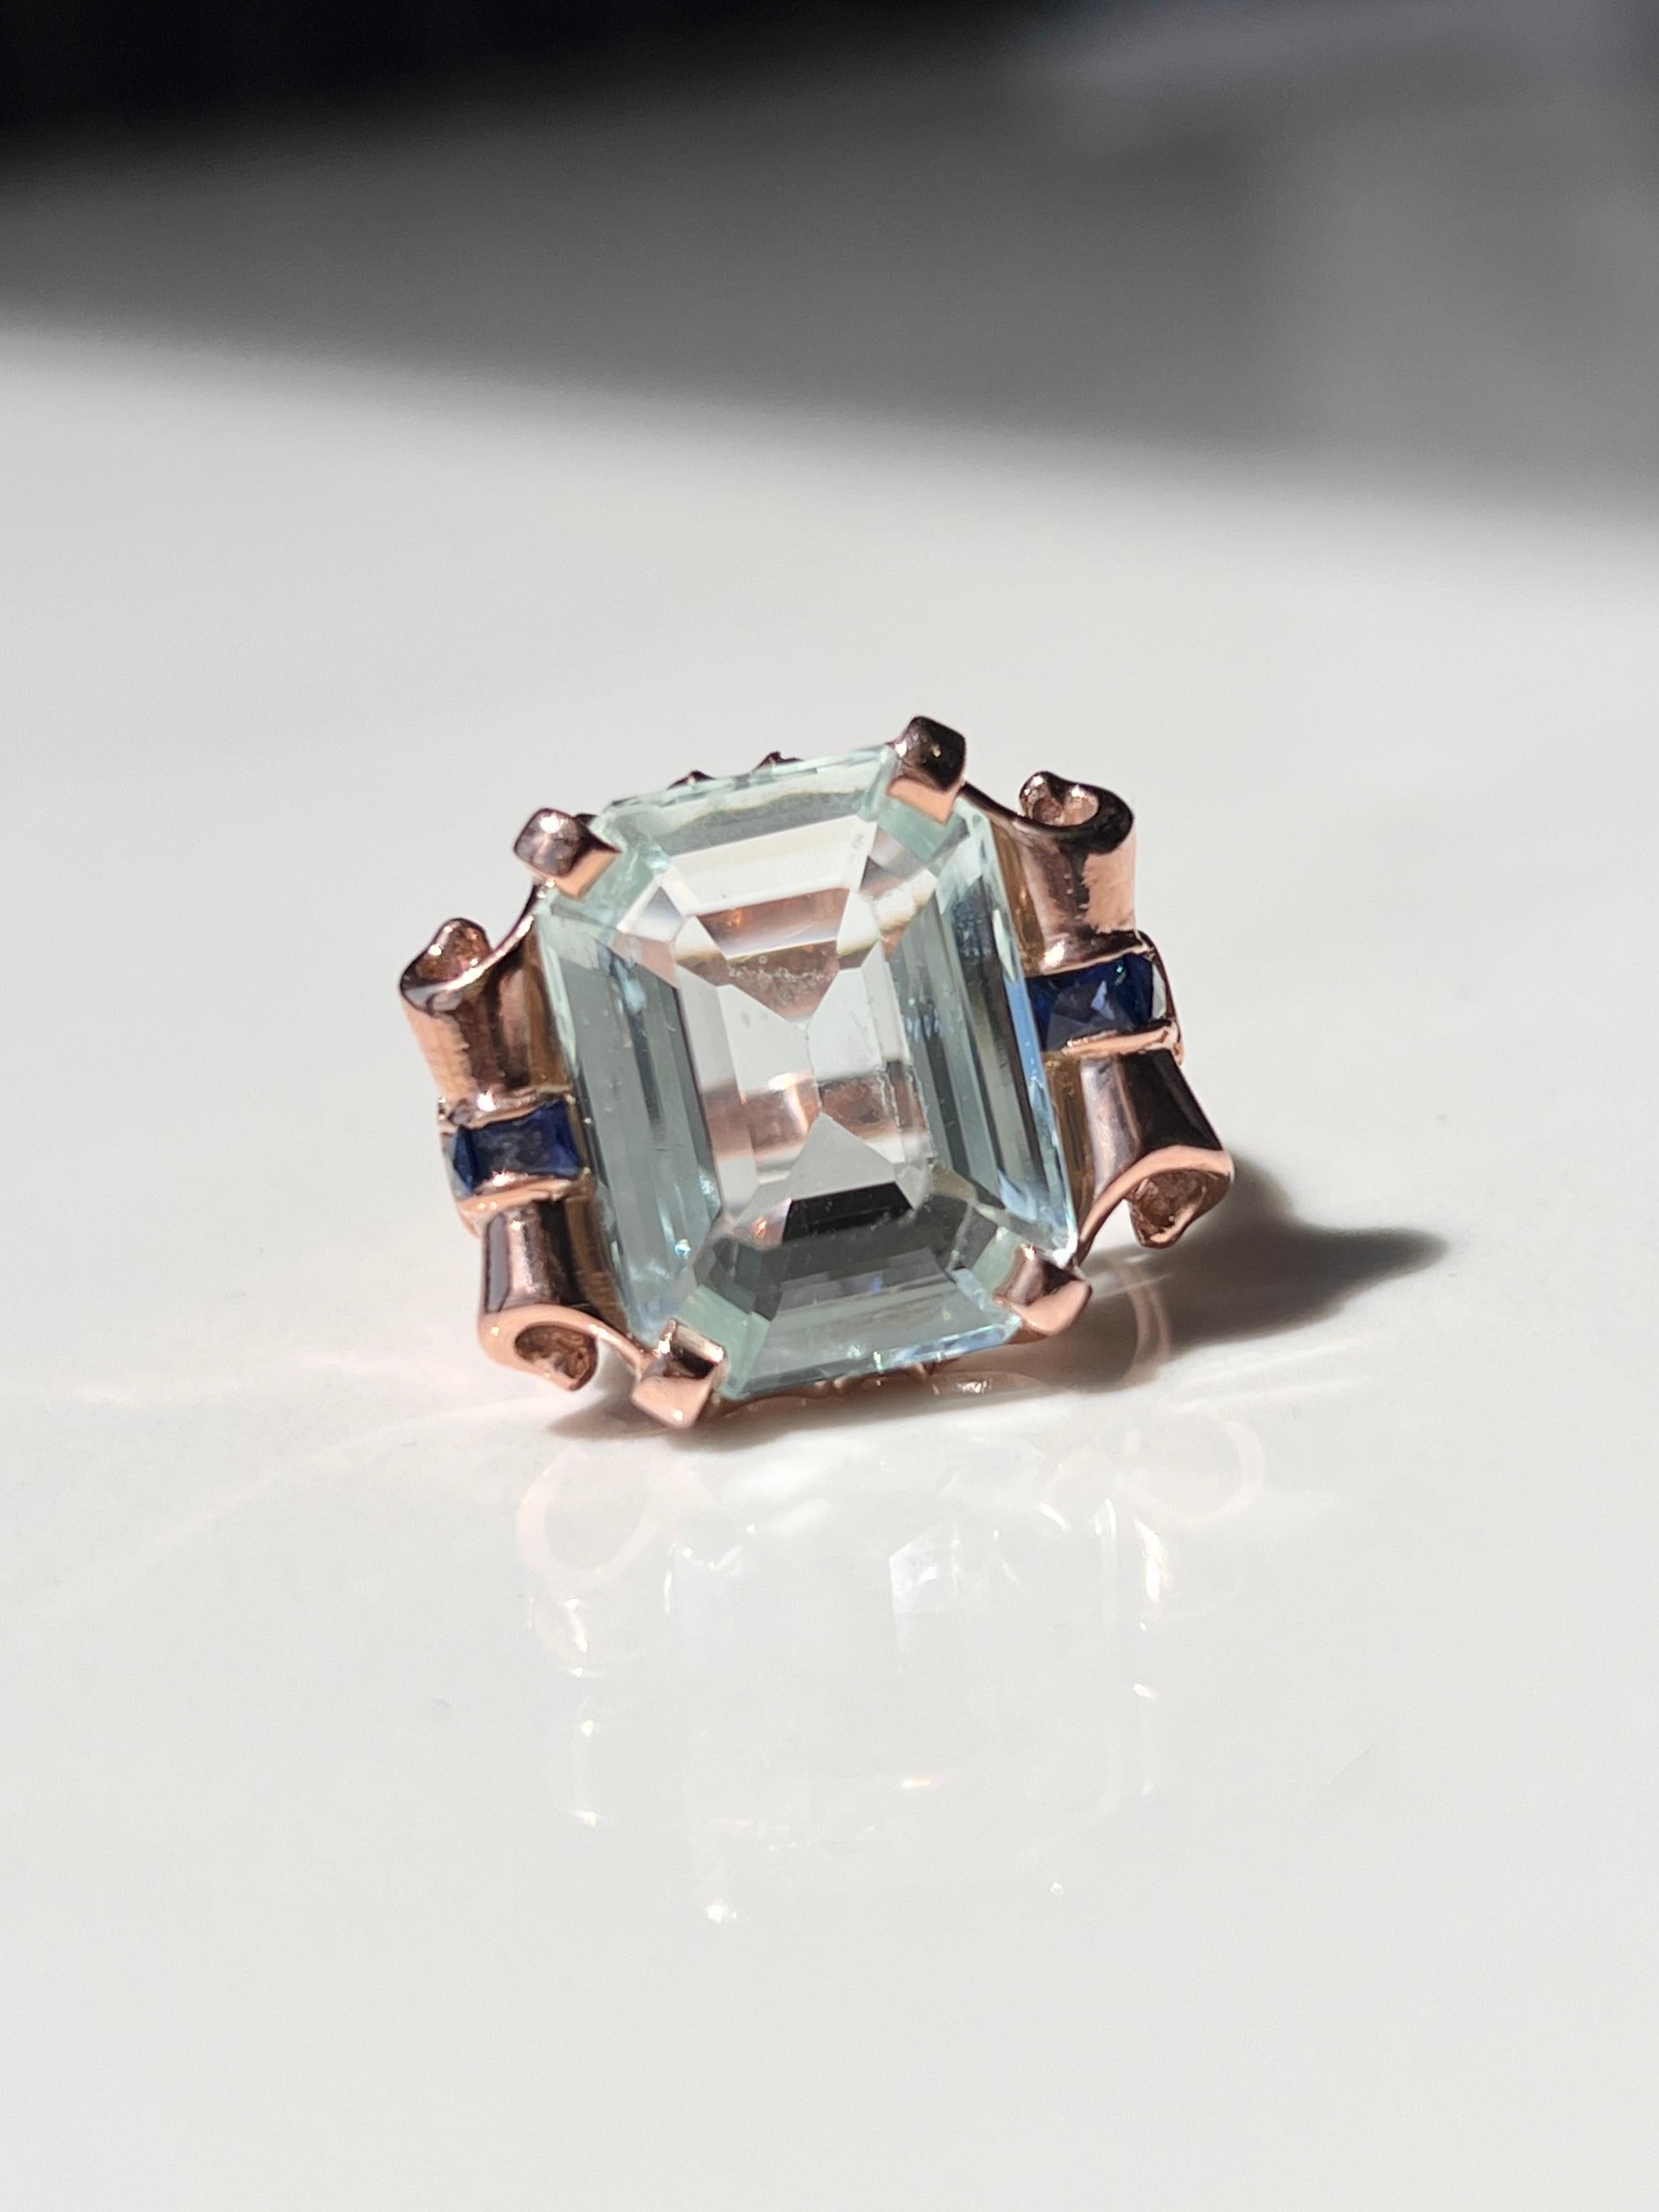 This exquisite vintage victorian style aquamarine ring, features a stunning natural pale blue aquamarine gemstone accompanied with natural sapphires in an intricately detailed scroll design.

This timeless piece exudes elegance and charm, making it